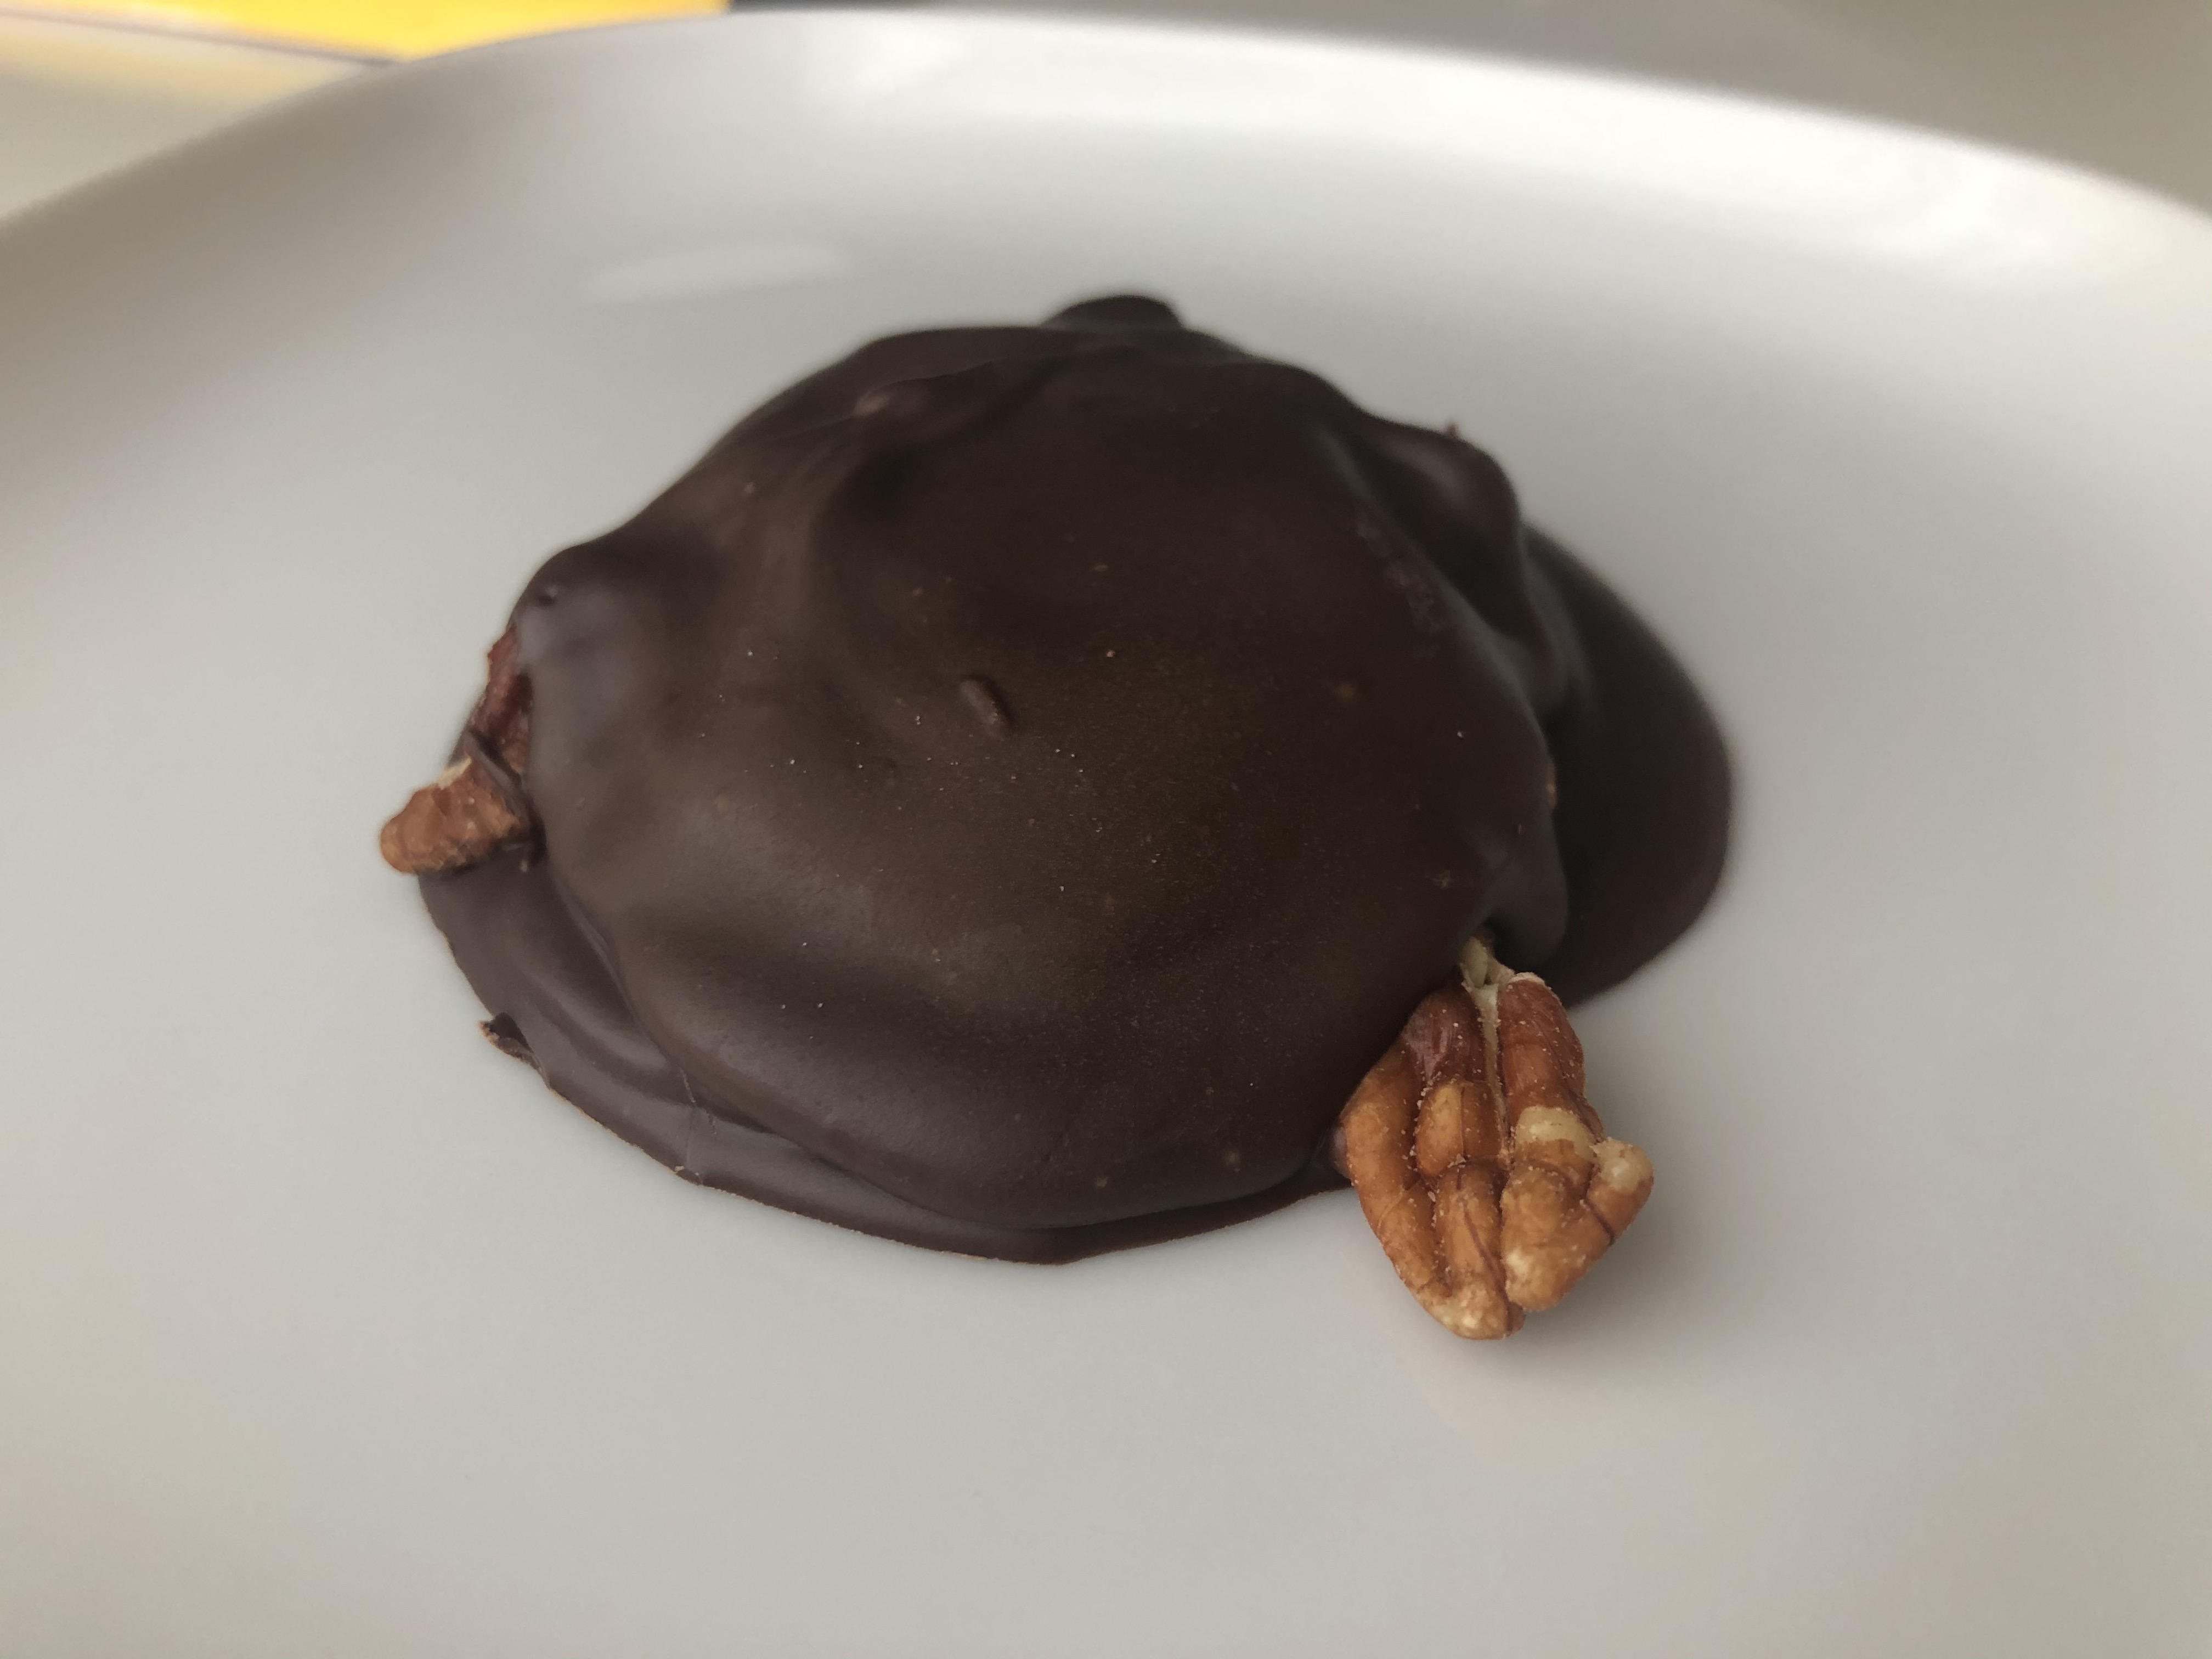 A single turtle with a large pecan sticking out of the hardened milk chocolate turtle by Sugga Shaii Sweets. Photo by Alyssa Buckley.